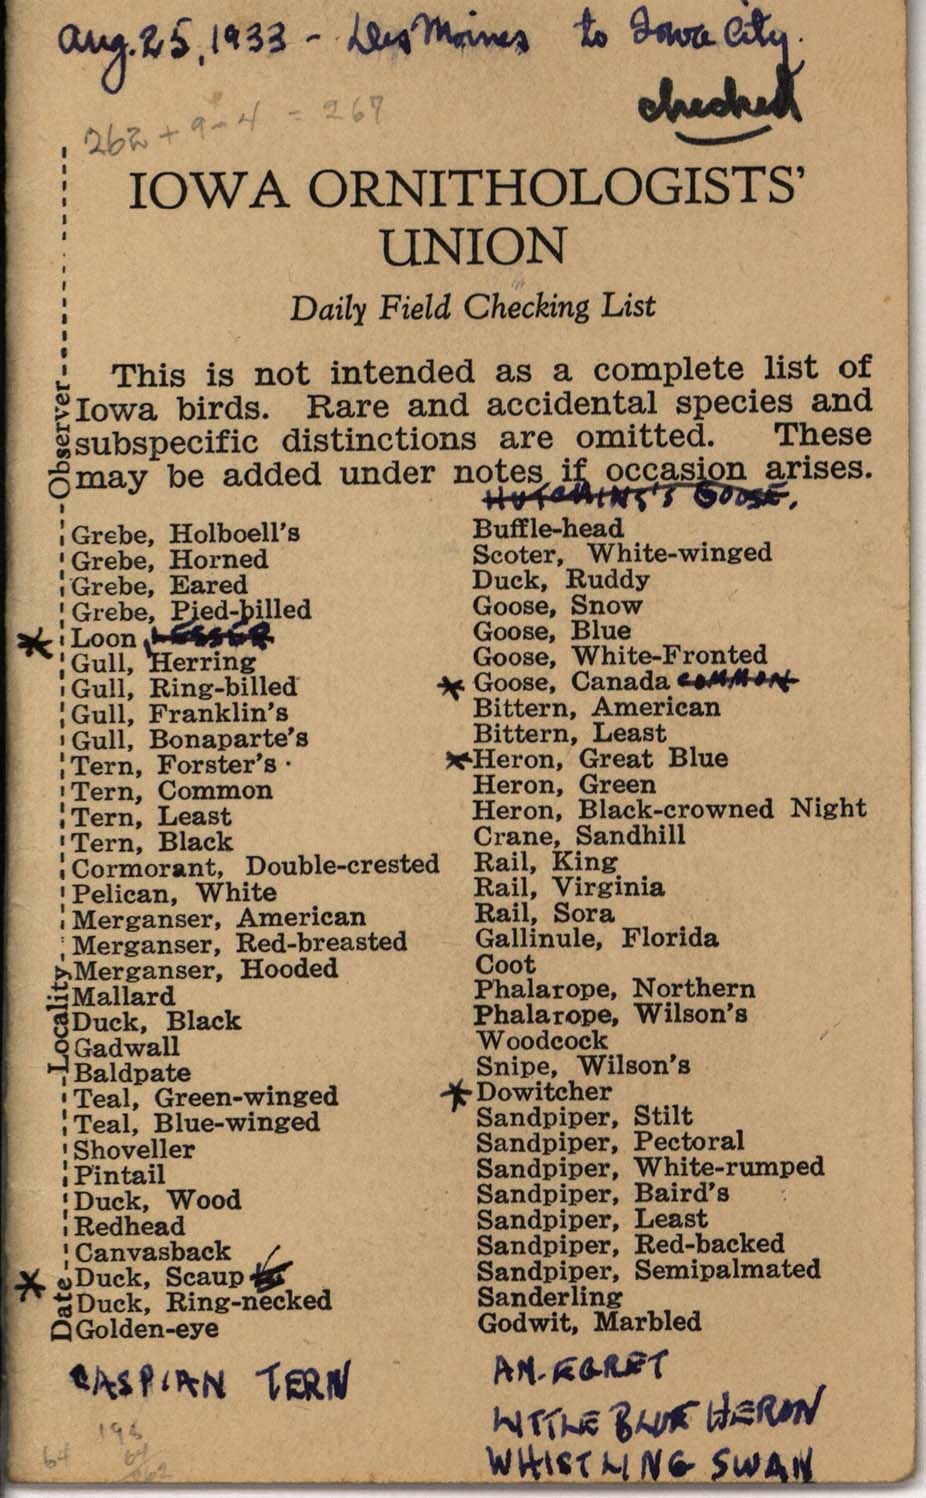 Daily field checking list, Philip DuMont, August 25, 1933